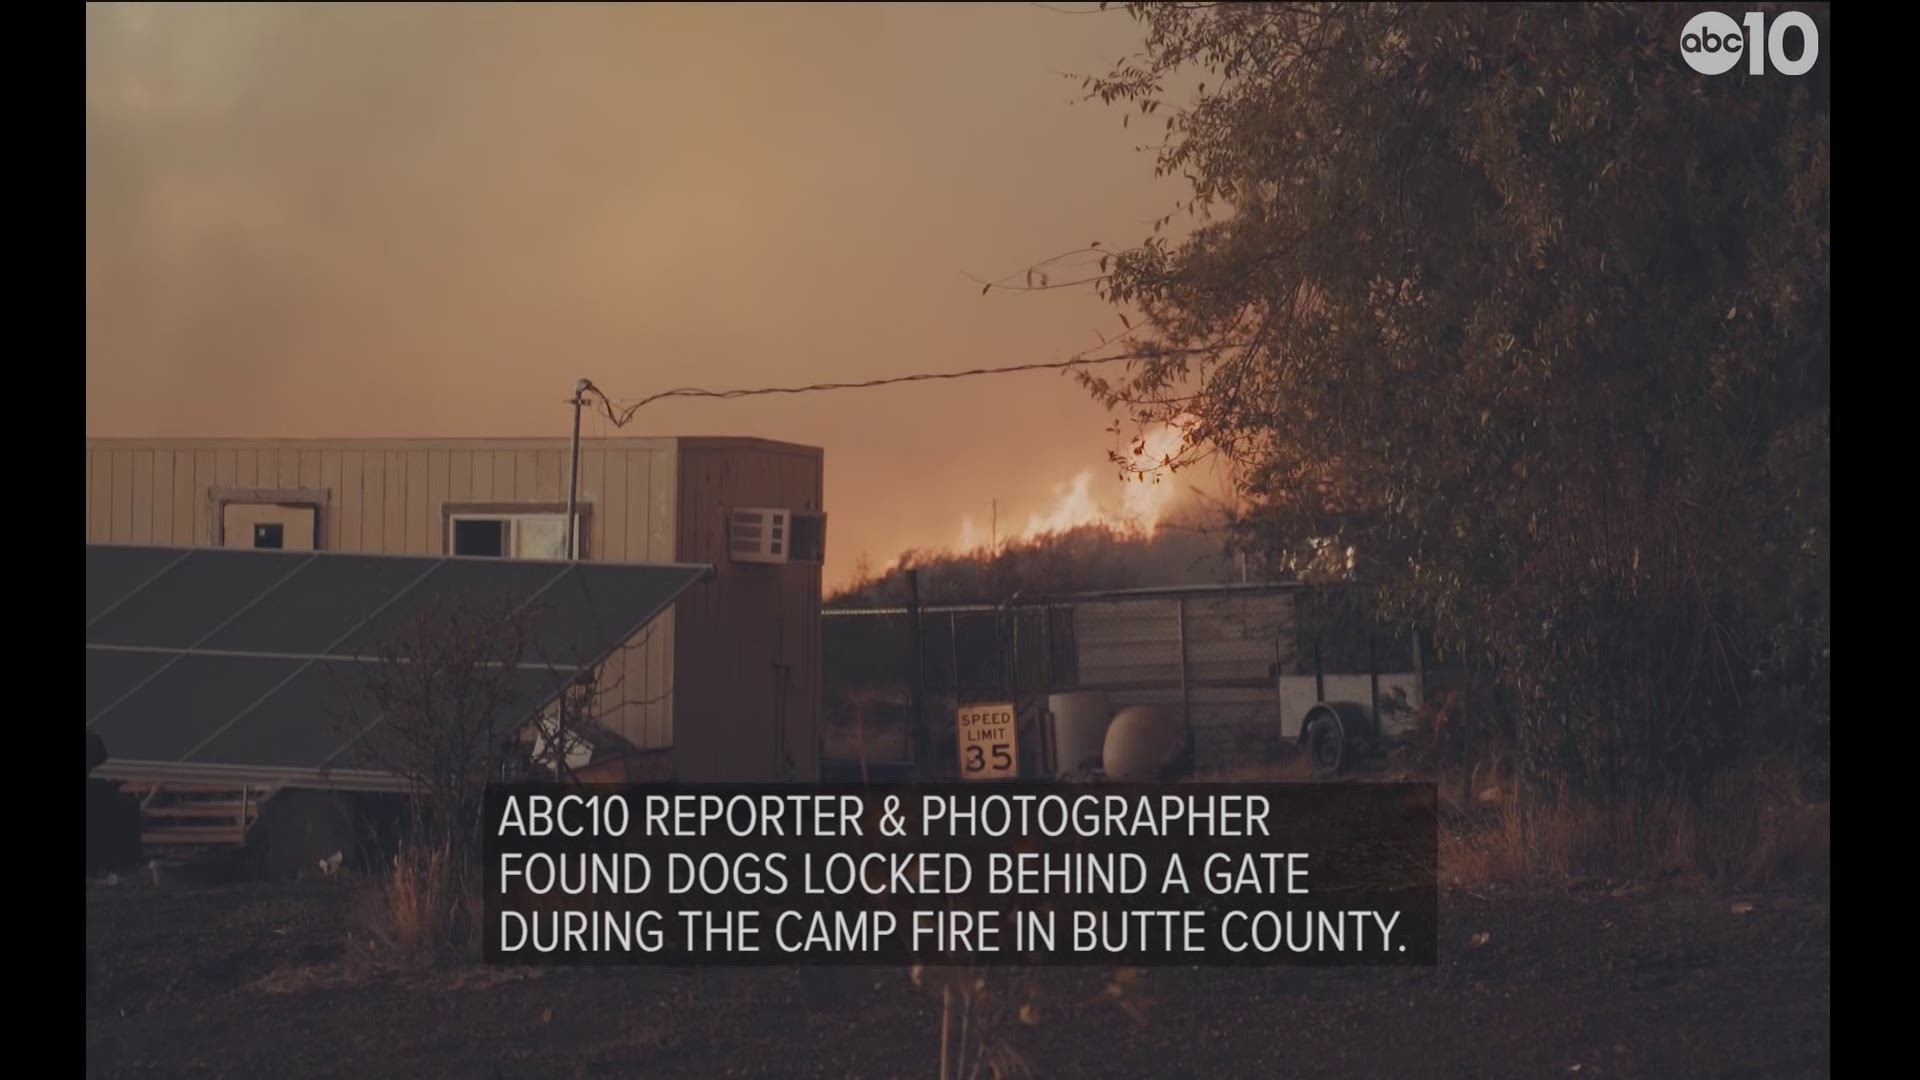 ABC10 REPORTER & PHOTOGRAPHER, BRANDON RITTIMAN AND PEDRO GARCIA, FOUND DOGS LOCKED BEHIND A GATE DURING THE CAMP FIRE IN BUTTE COUNTY.